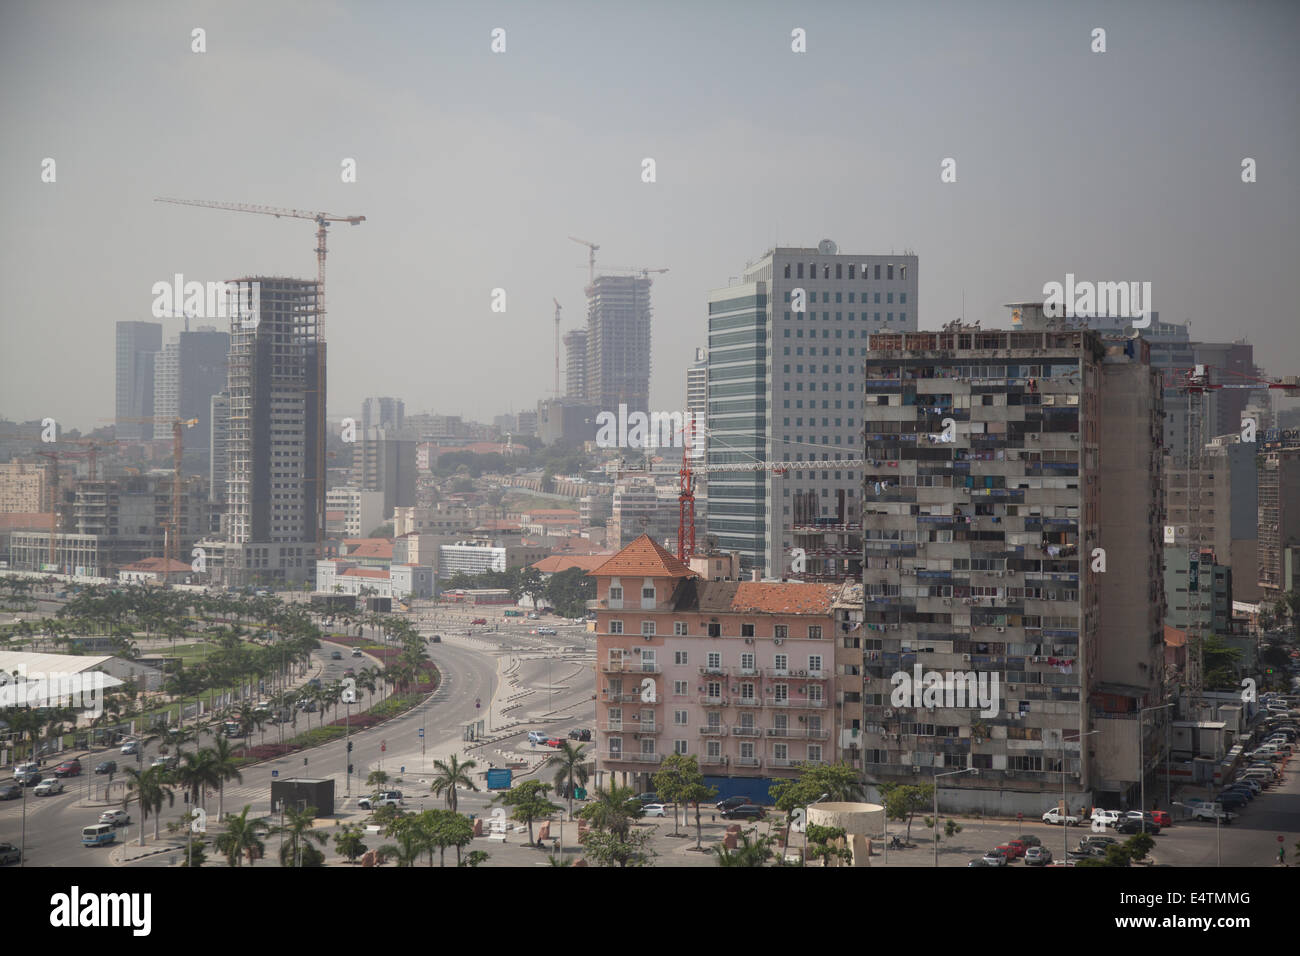 Angola, Luanda buildings country profile cityscape city life new sky scrapers in town Stock Photo